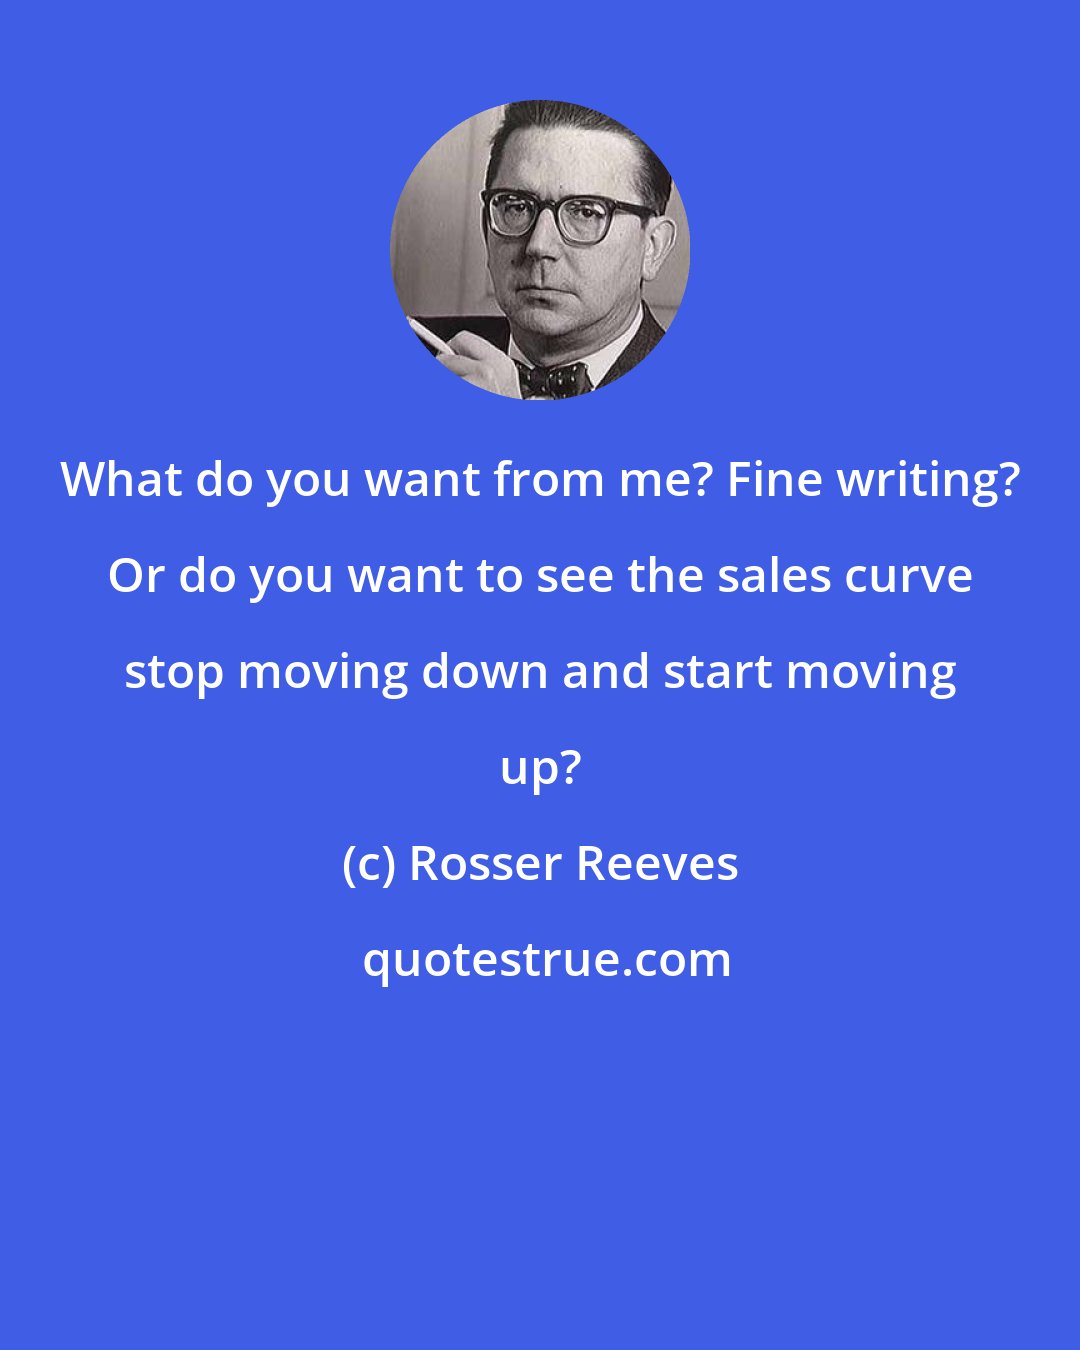 Rosser Reeves: What do you want from me? Fine writing? Or do you want to see the sales curve stop moving down and start moving up?